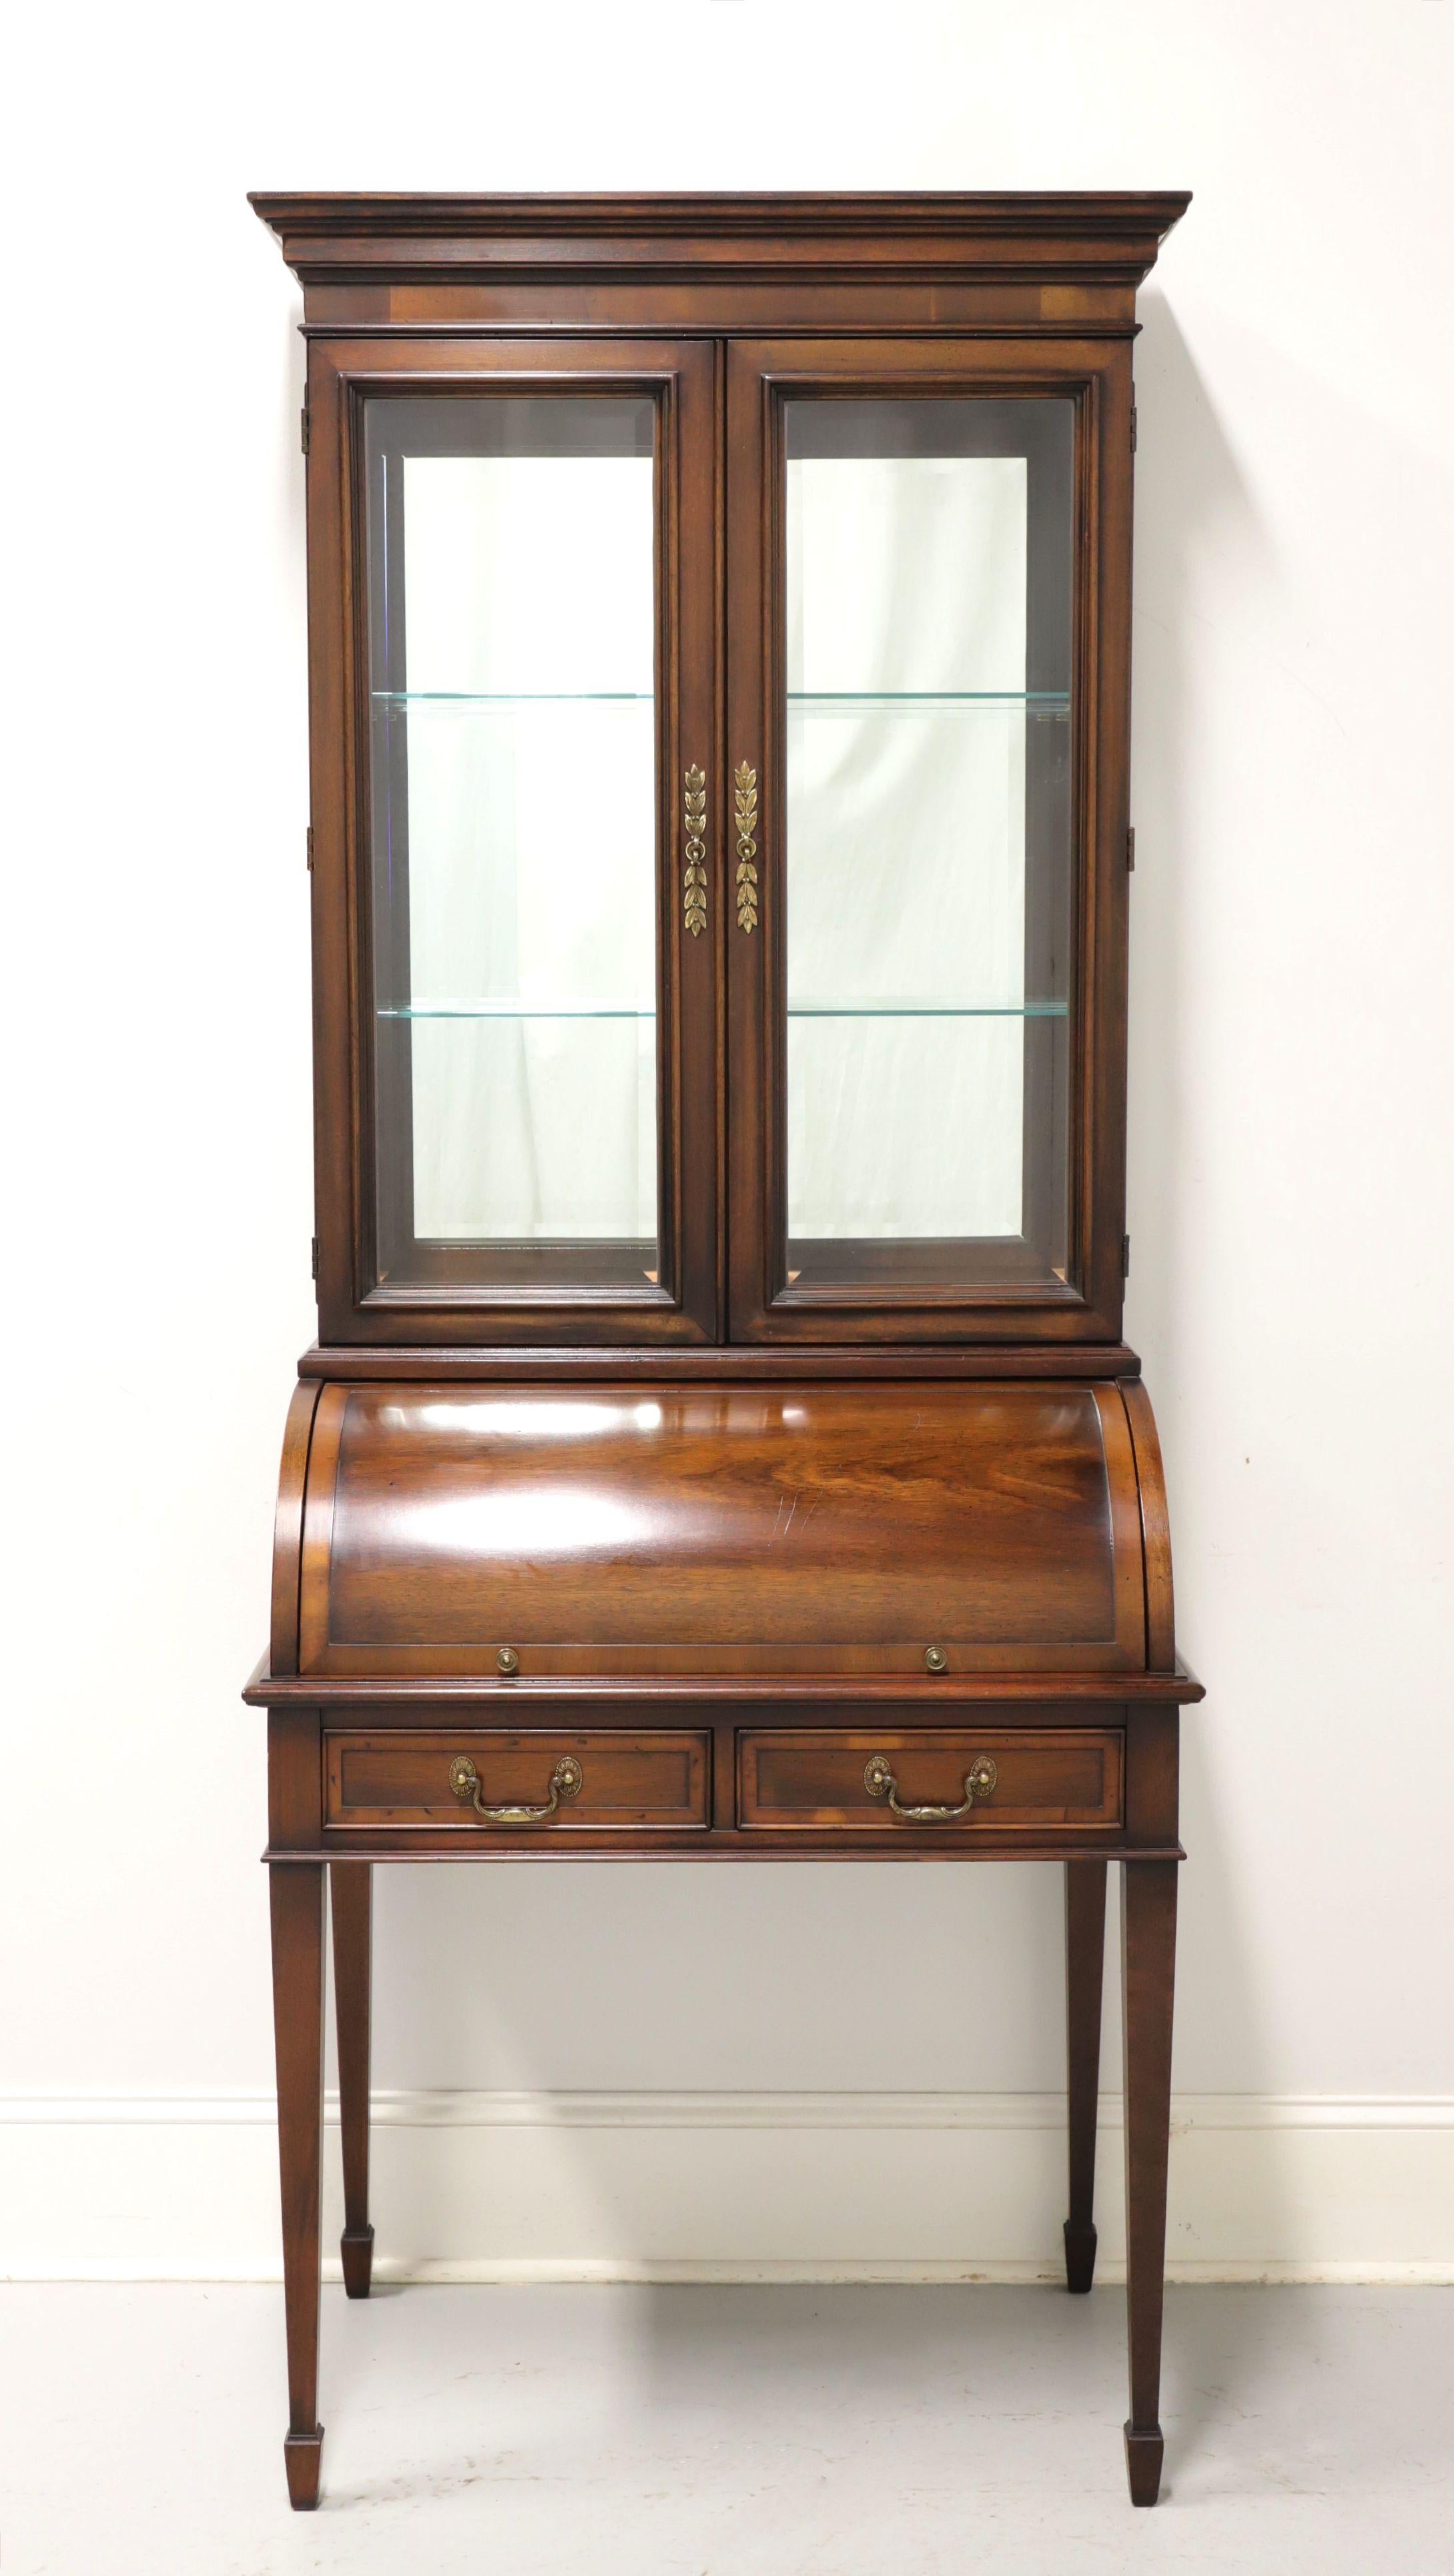 A Traditional style petite secretary desk by Hekman. Solid mahogany with yew wood banding, brass hardware, crown moulding at top, tapered straight legs, and spade feet. Upper cabinet has beveled glass doors & side panels, is lighted, mirrored back,